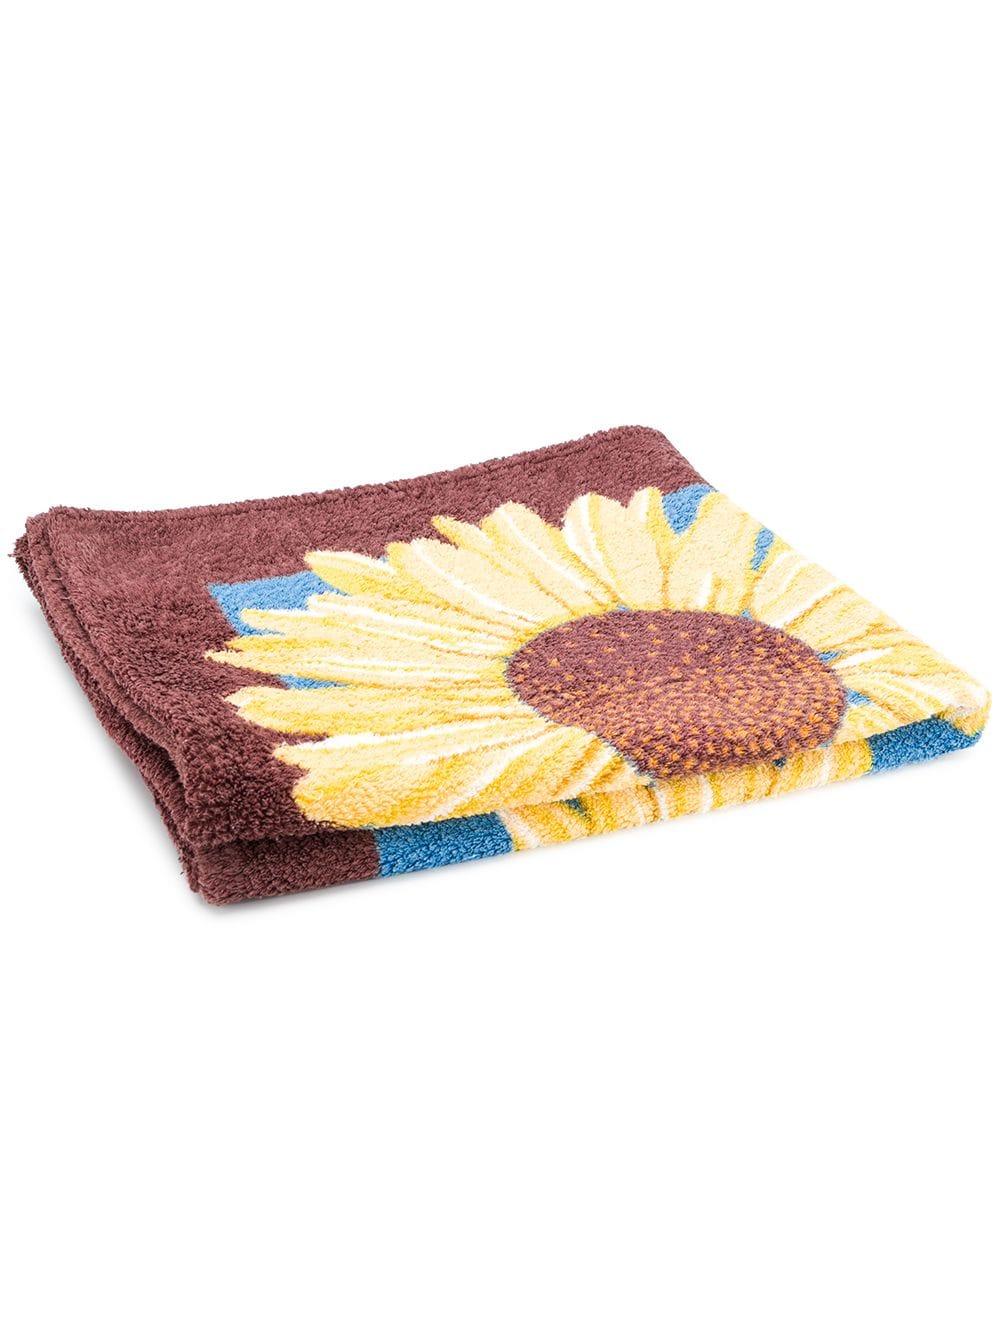 Hermes mulltico cotton beach towel featuring a sunflower print, a white back side.
In good vintage condition. Made in France.
35,4in. (90cm)  X 56.2 in. (143cm)
We guarantee you will receive this  iconic item as described and showed on